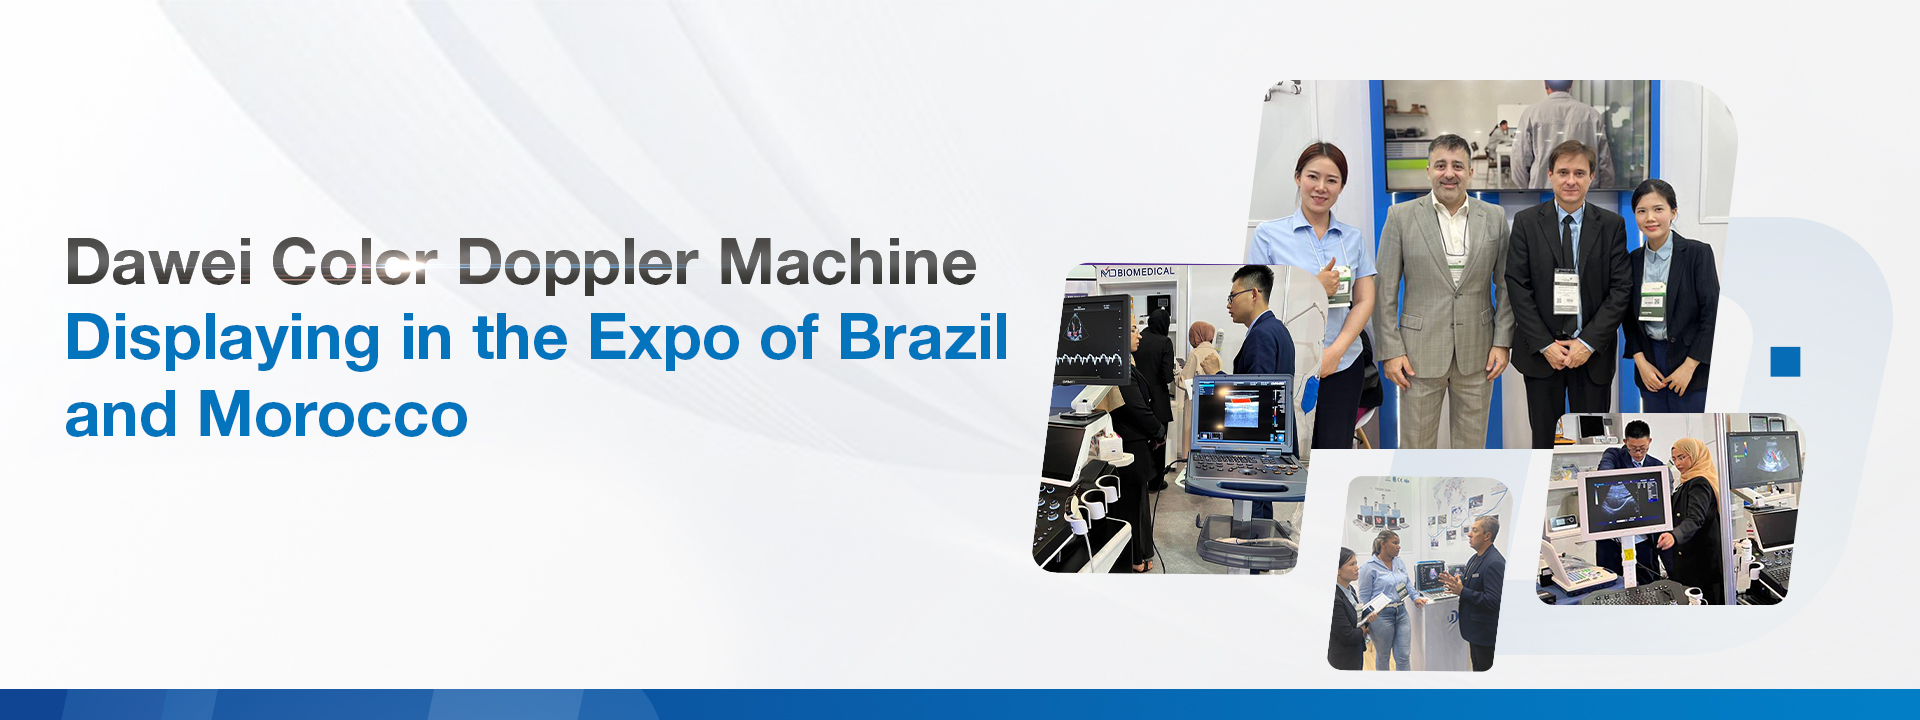 Dawei Color Doppler Machine: Displaying in the Expo of Brazil and Morocco